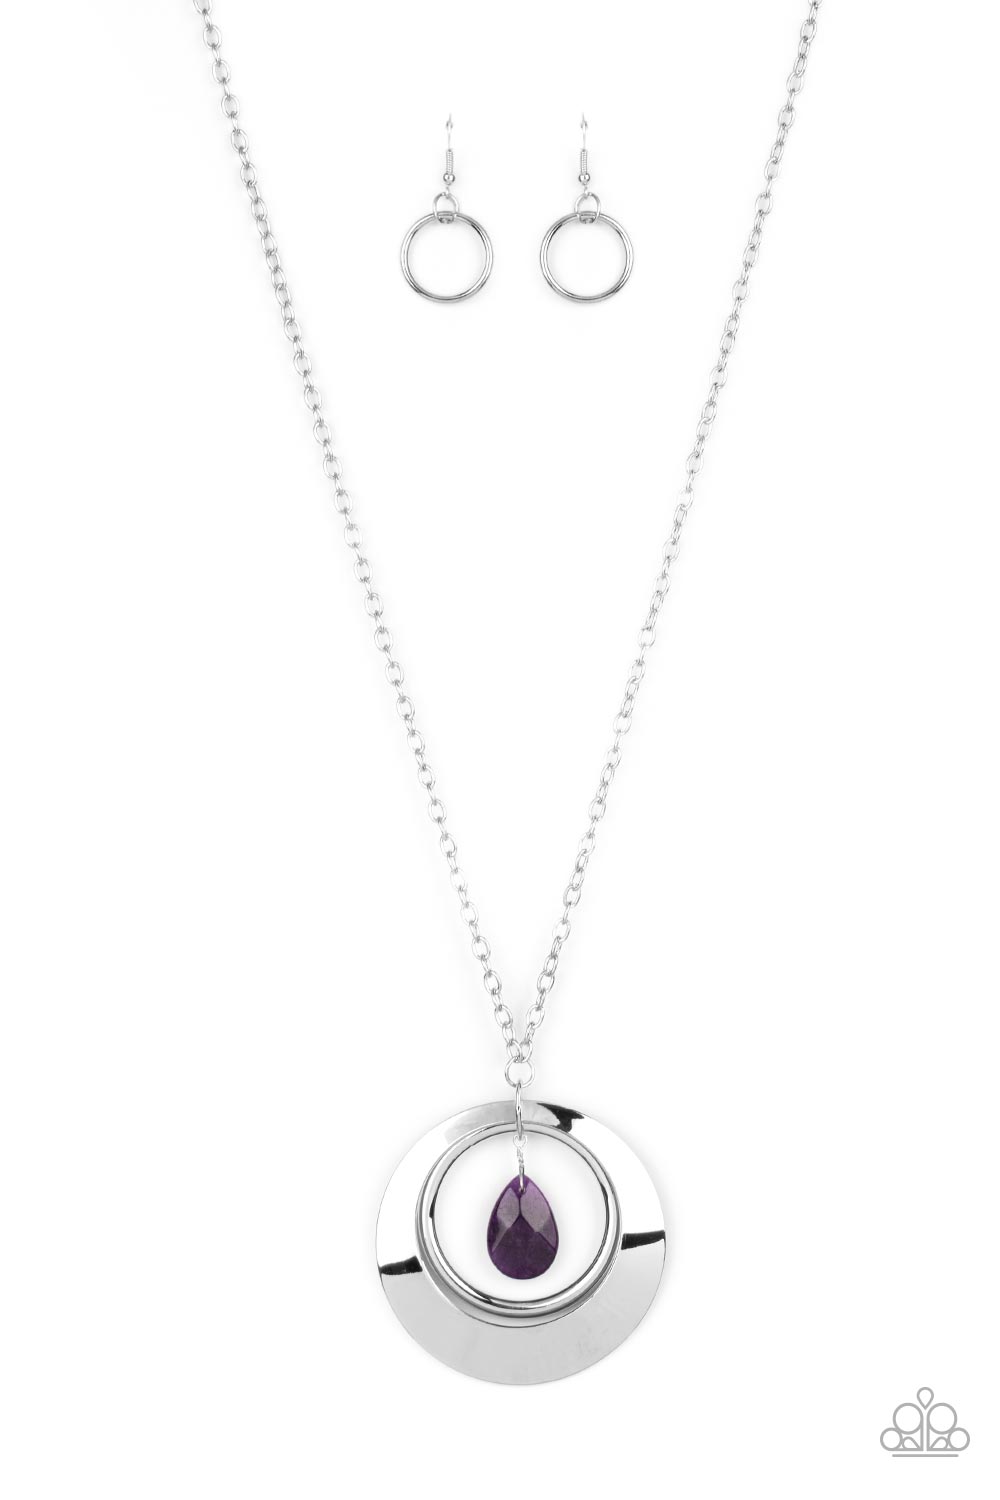 Paparazzi Necklace - Inner Tranquility - Purple